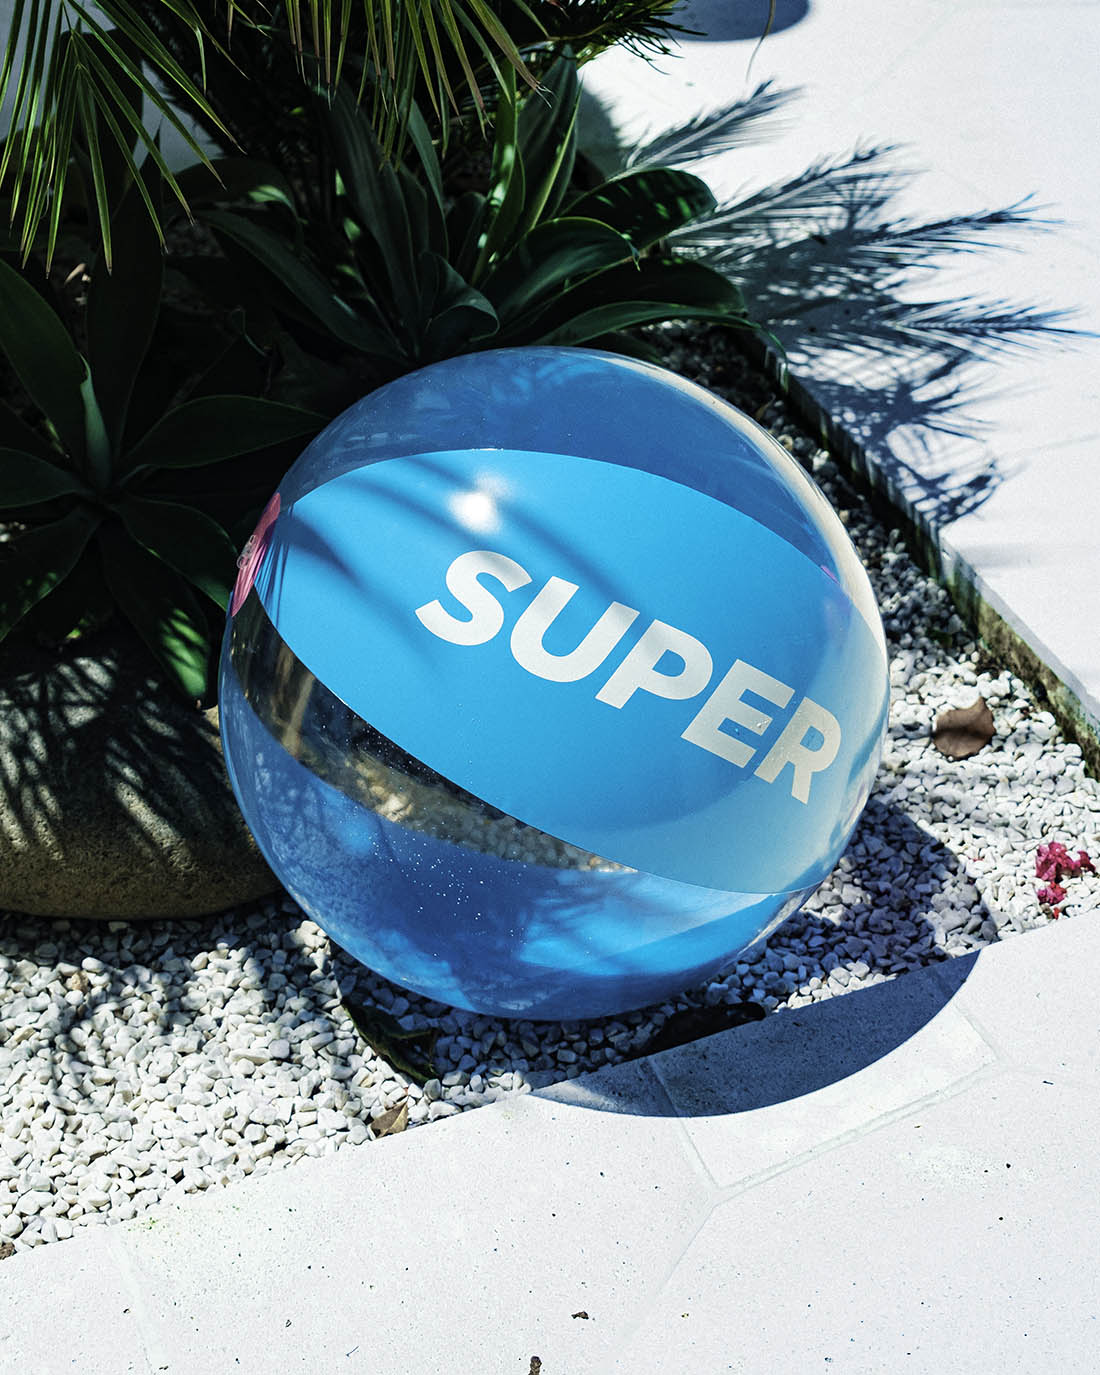 Beach ball with solid blue design.